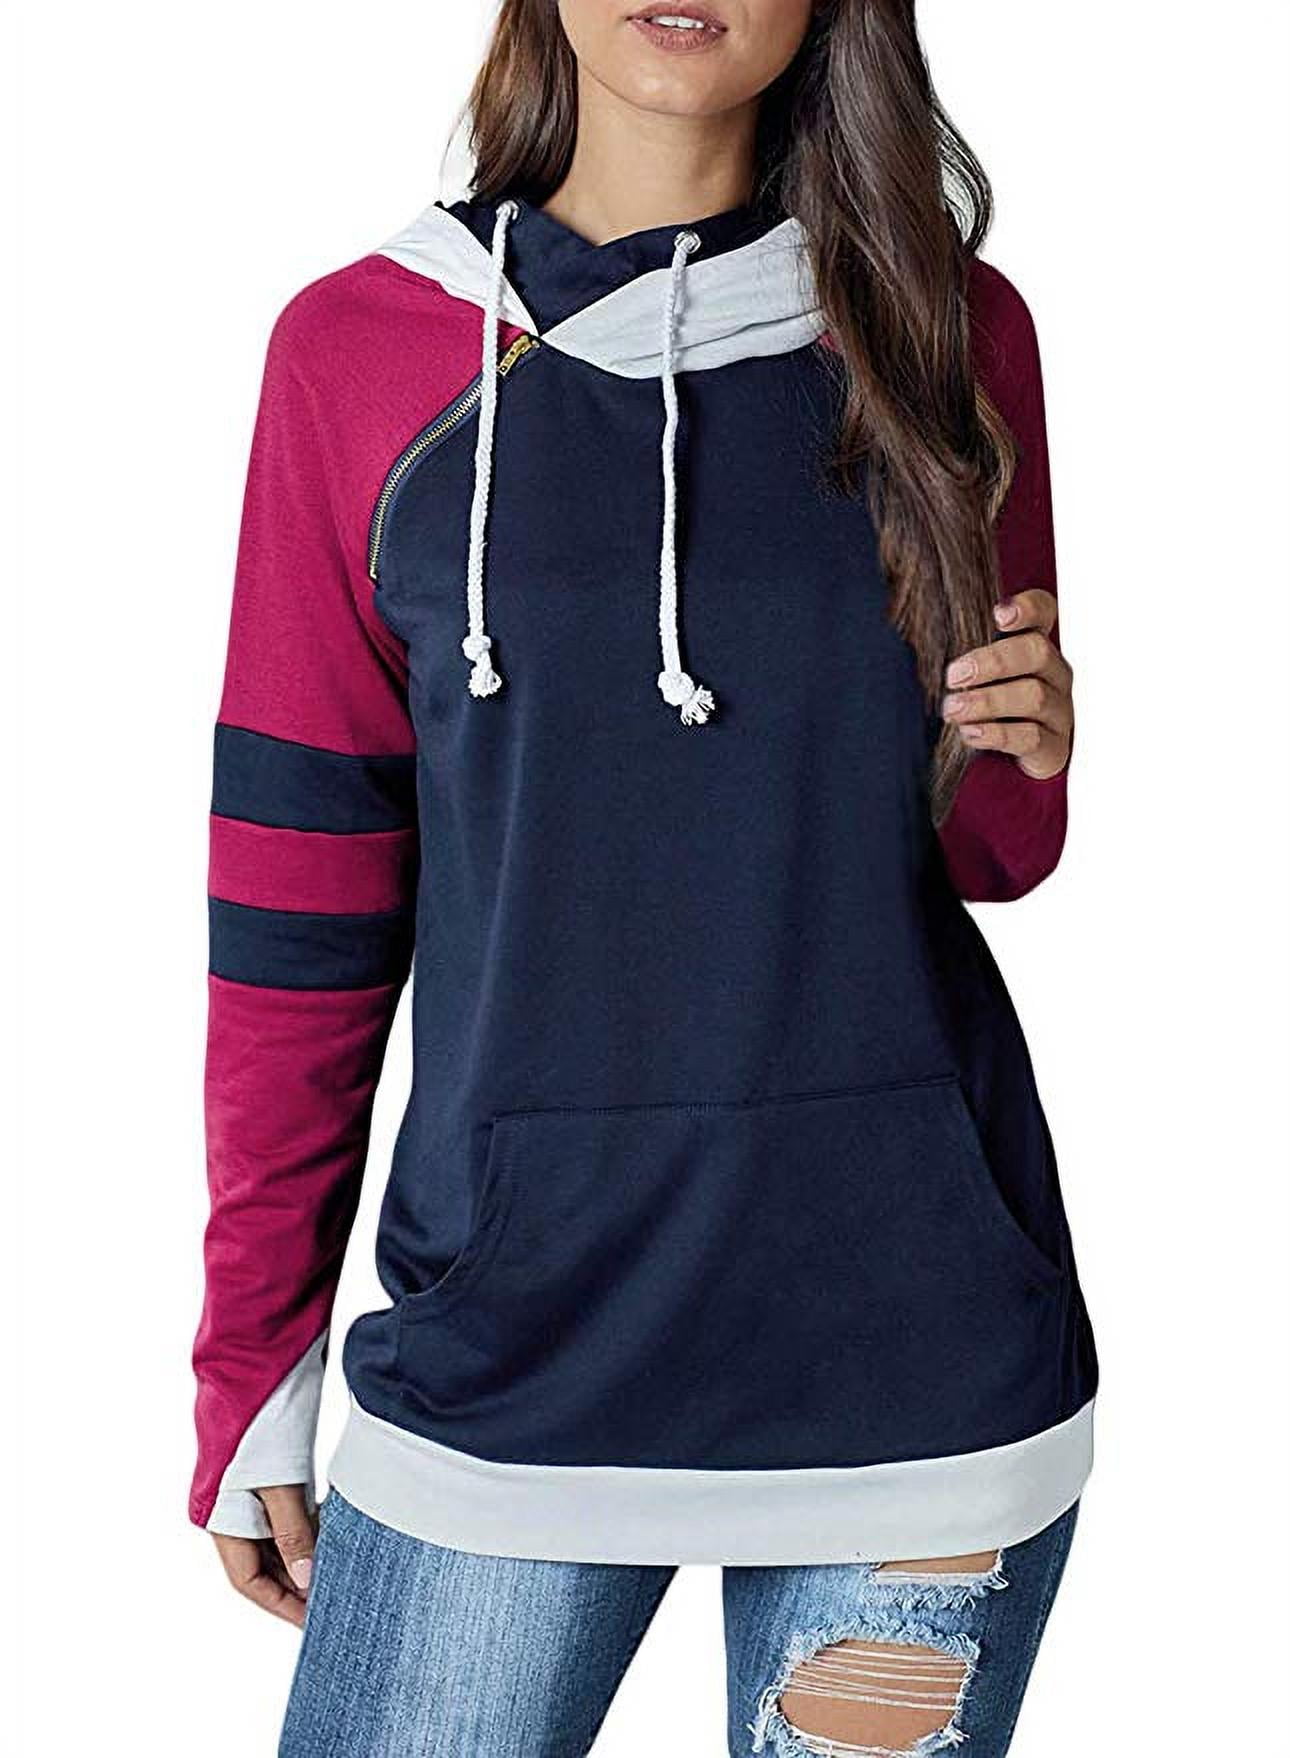 Womens Striped Hoodies Casual Cowl Neck Long Sleeve Drawstring Top Color Block Zipper Pullover Sweatshirt with Pockets 